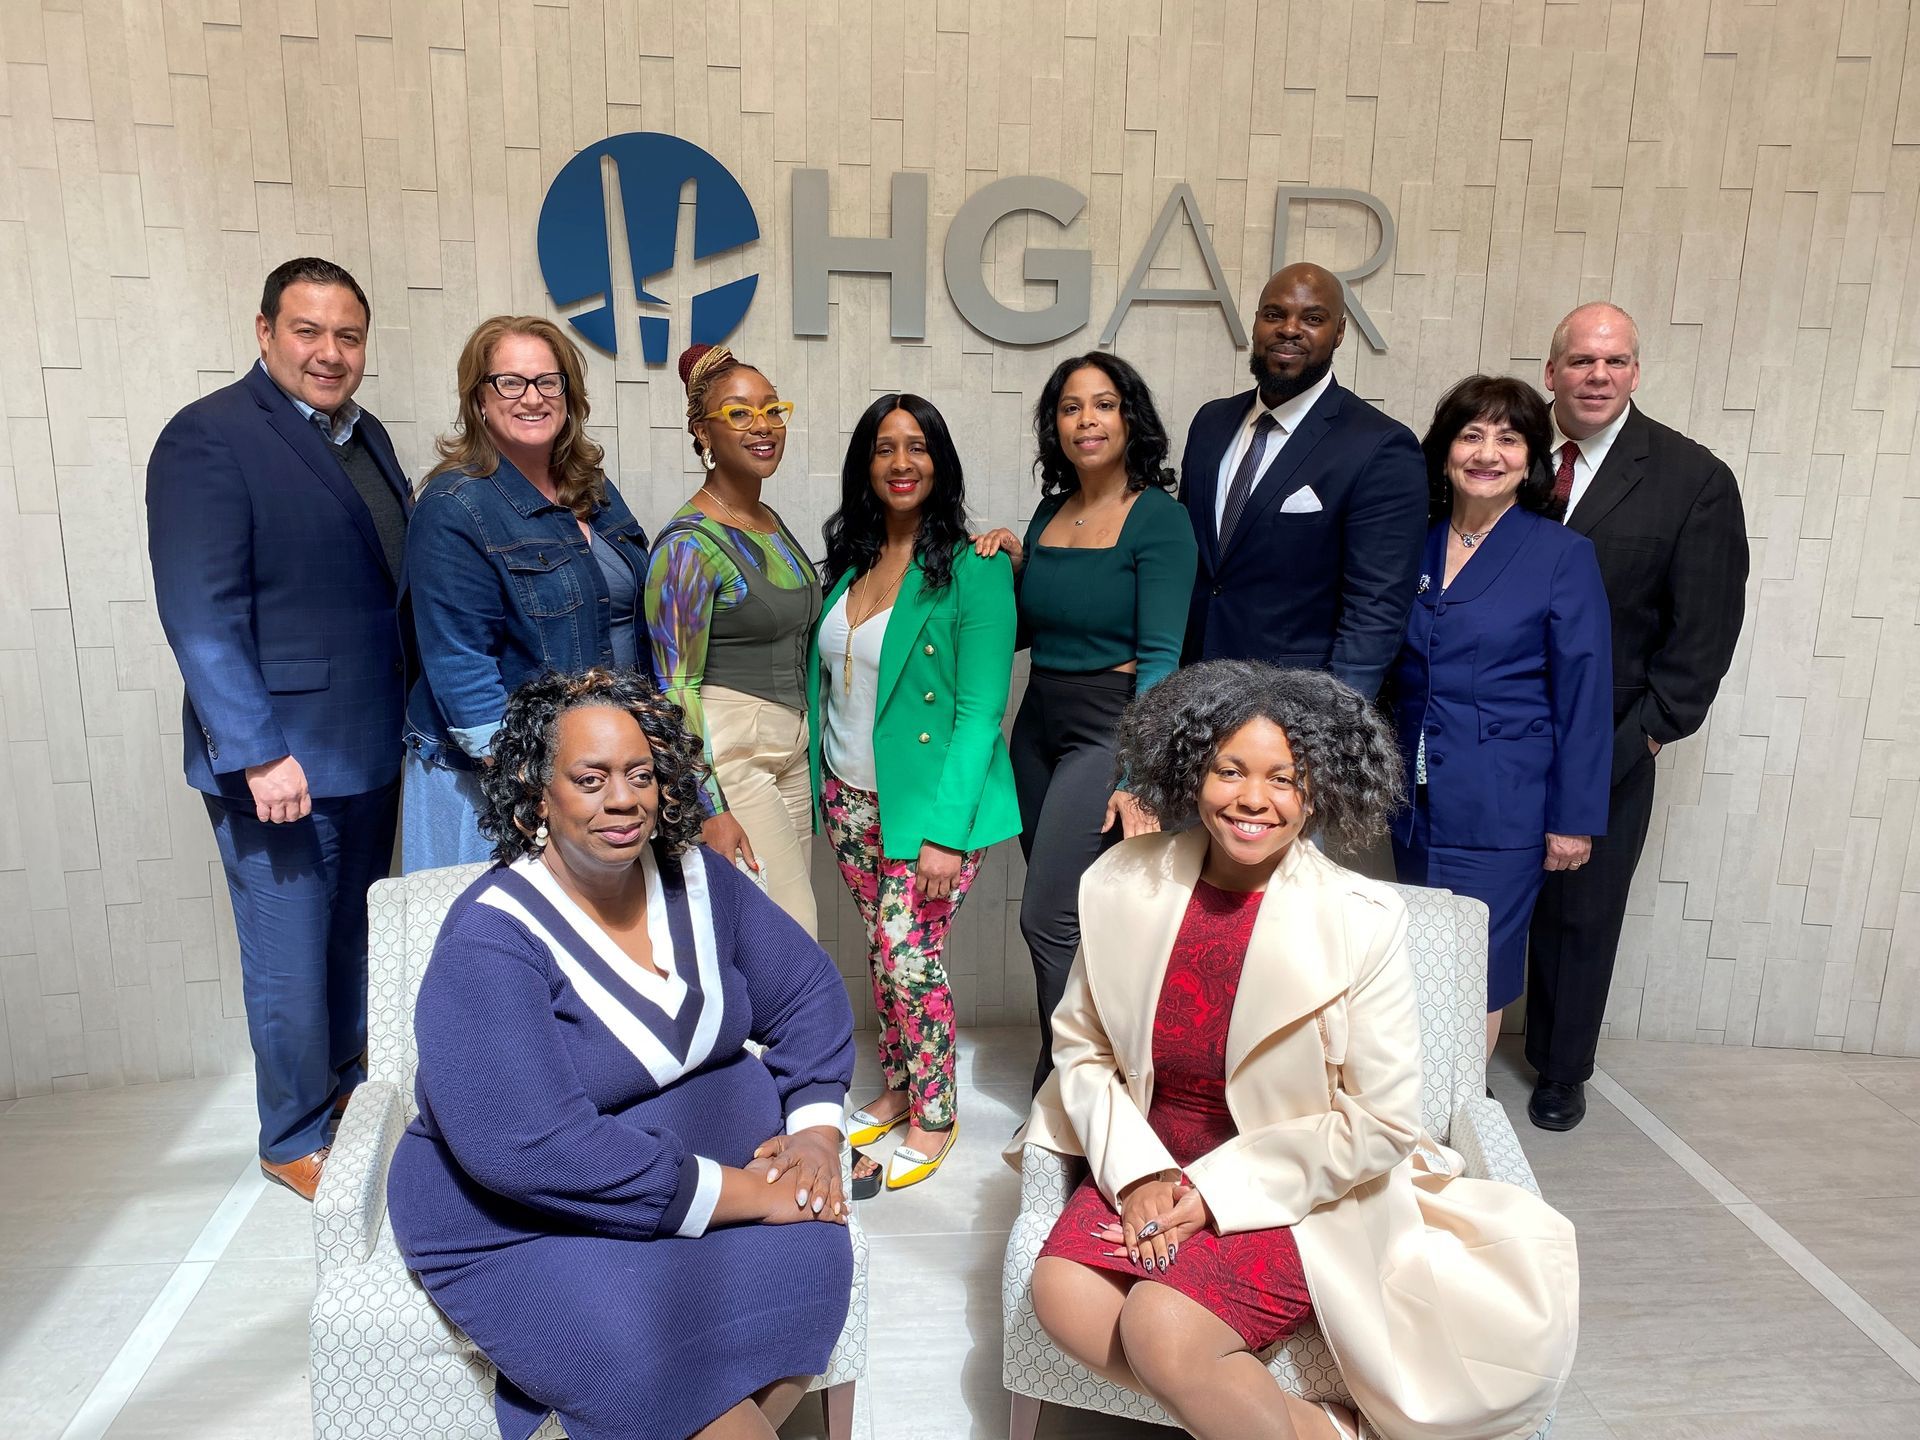 The Leadership Accelerator group in the lobby of the HGAR offices.